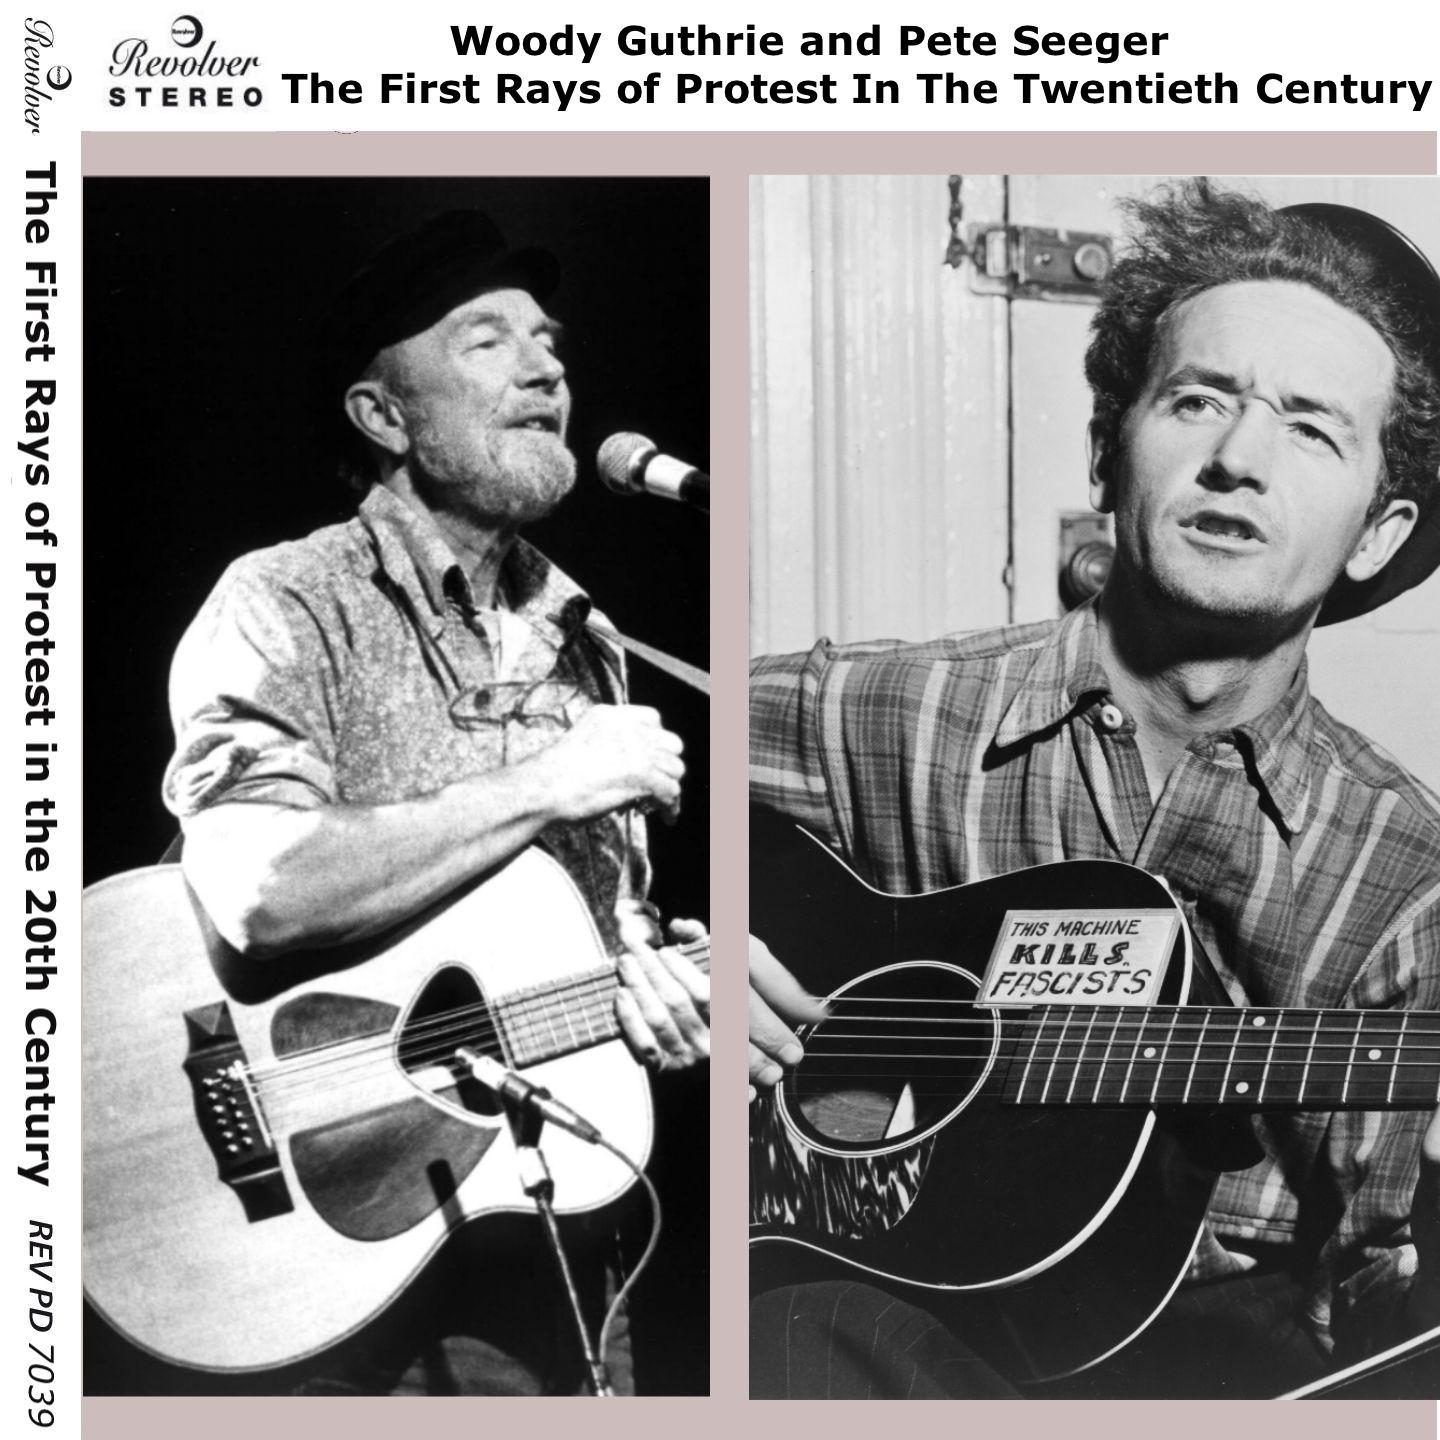 a picture from life"s other side - woody guthrie